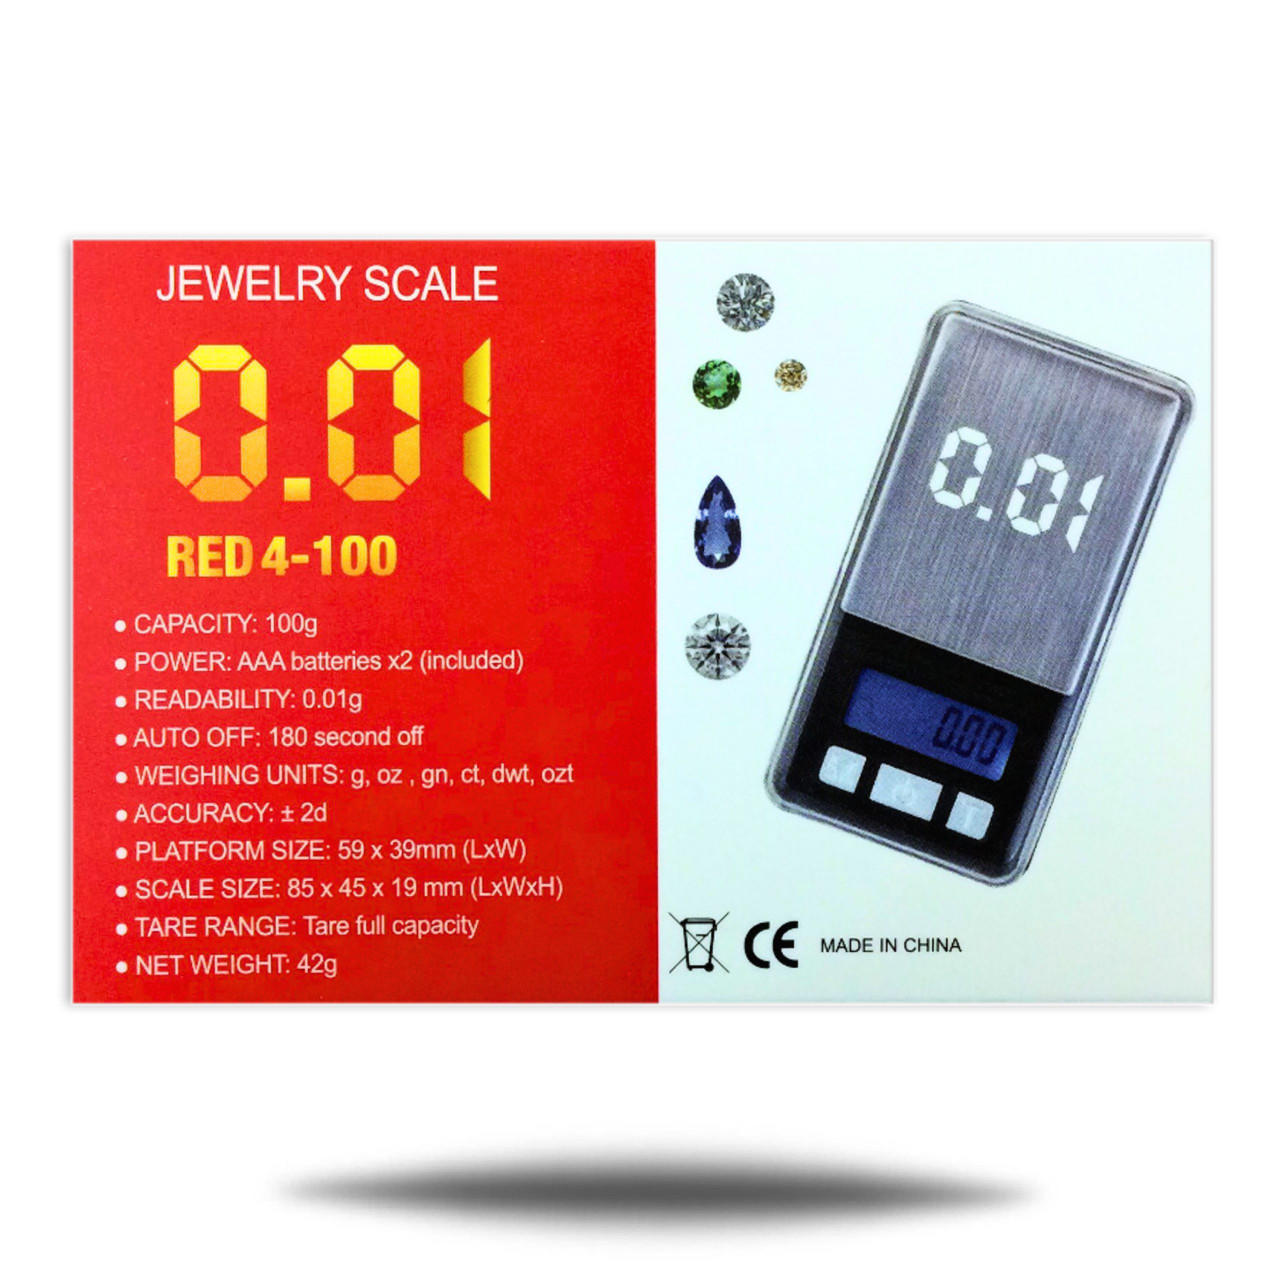 American Weigh Scales Digital Spoon Scale Sg-300